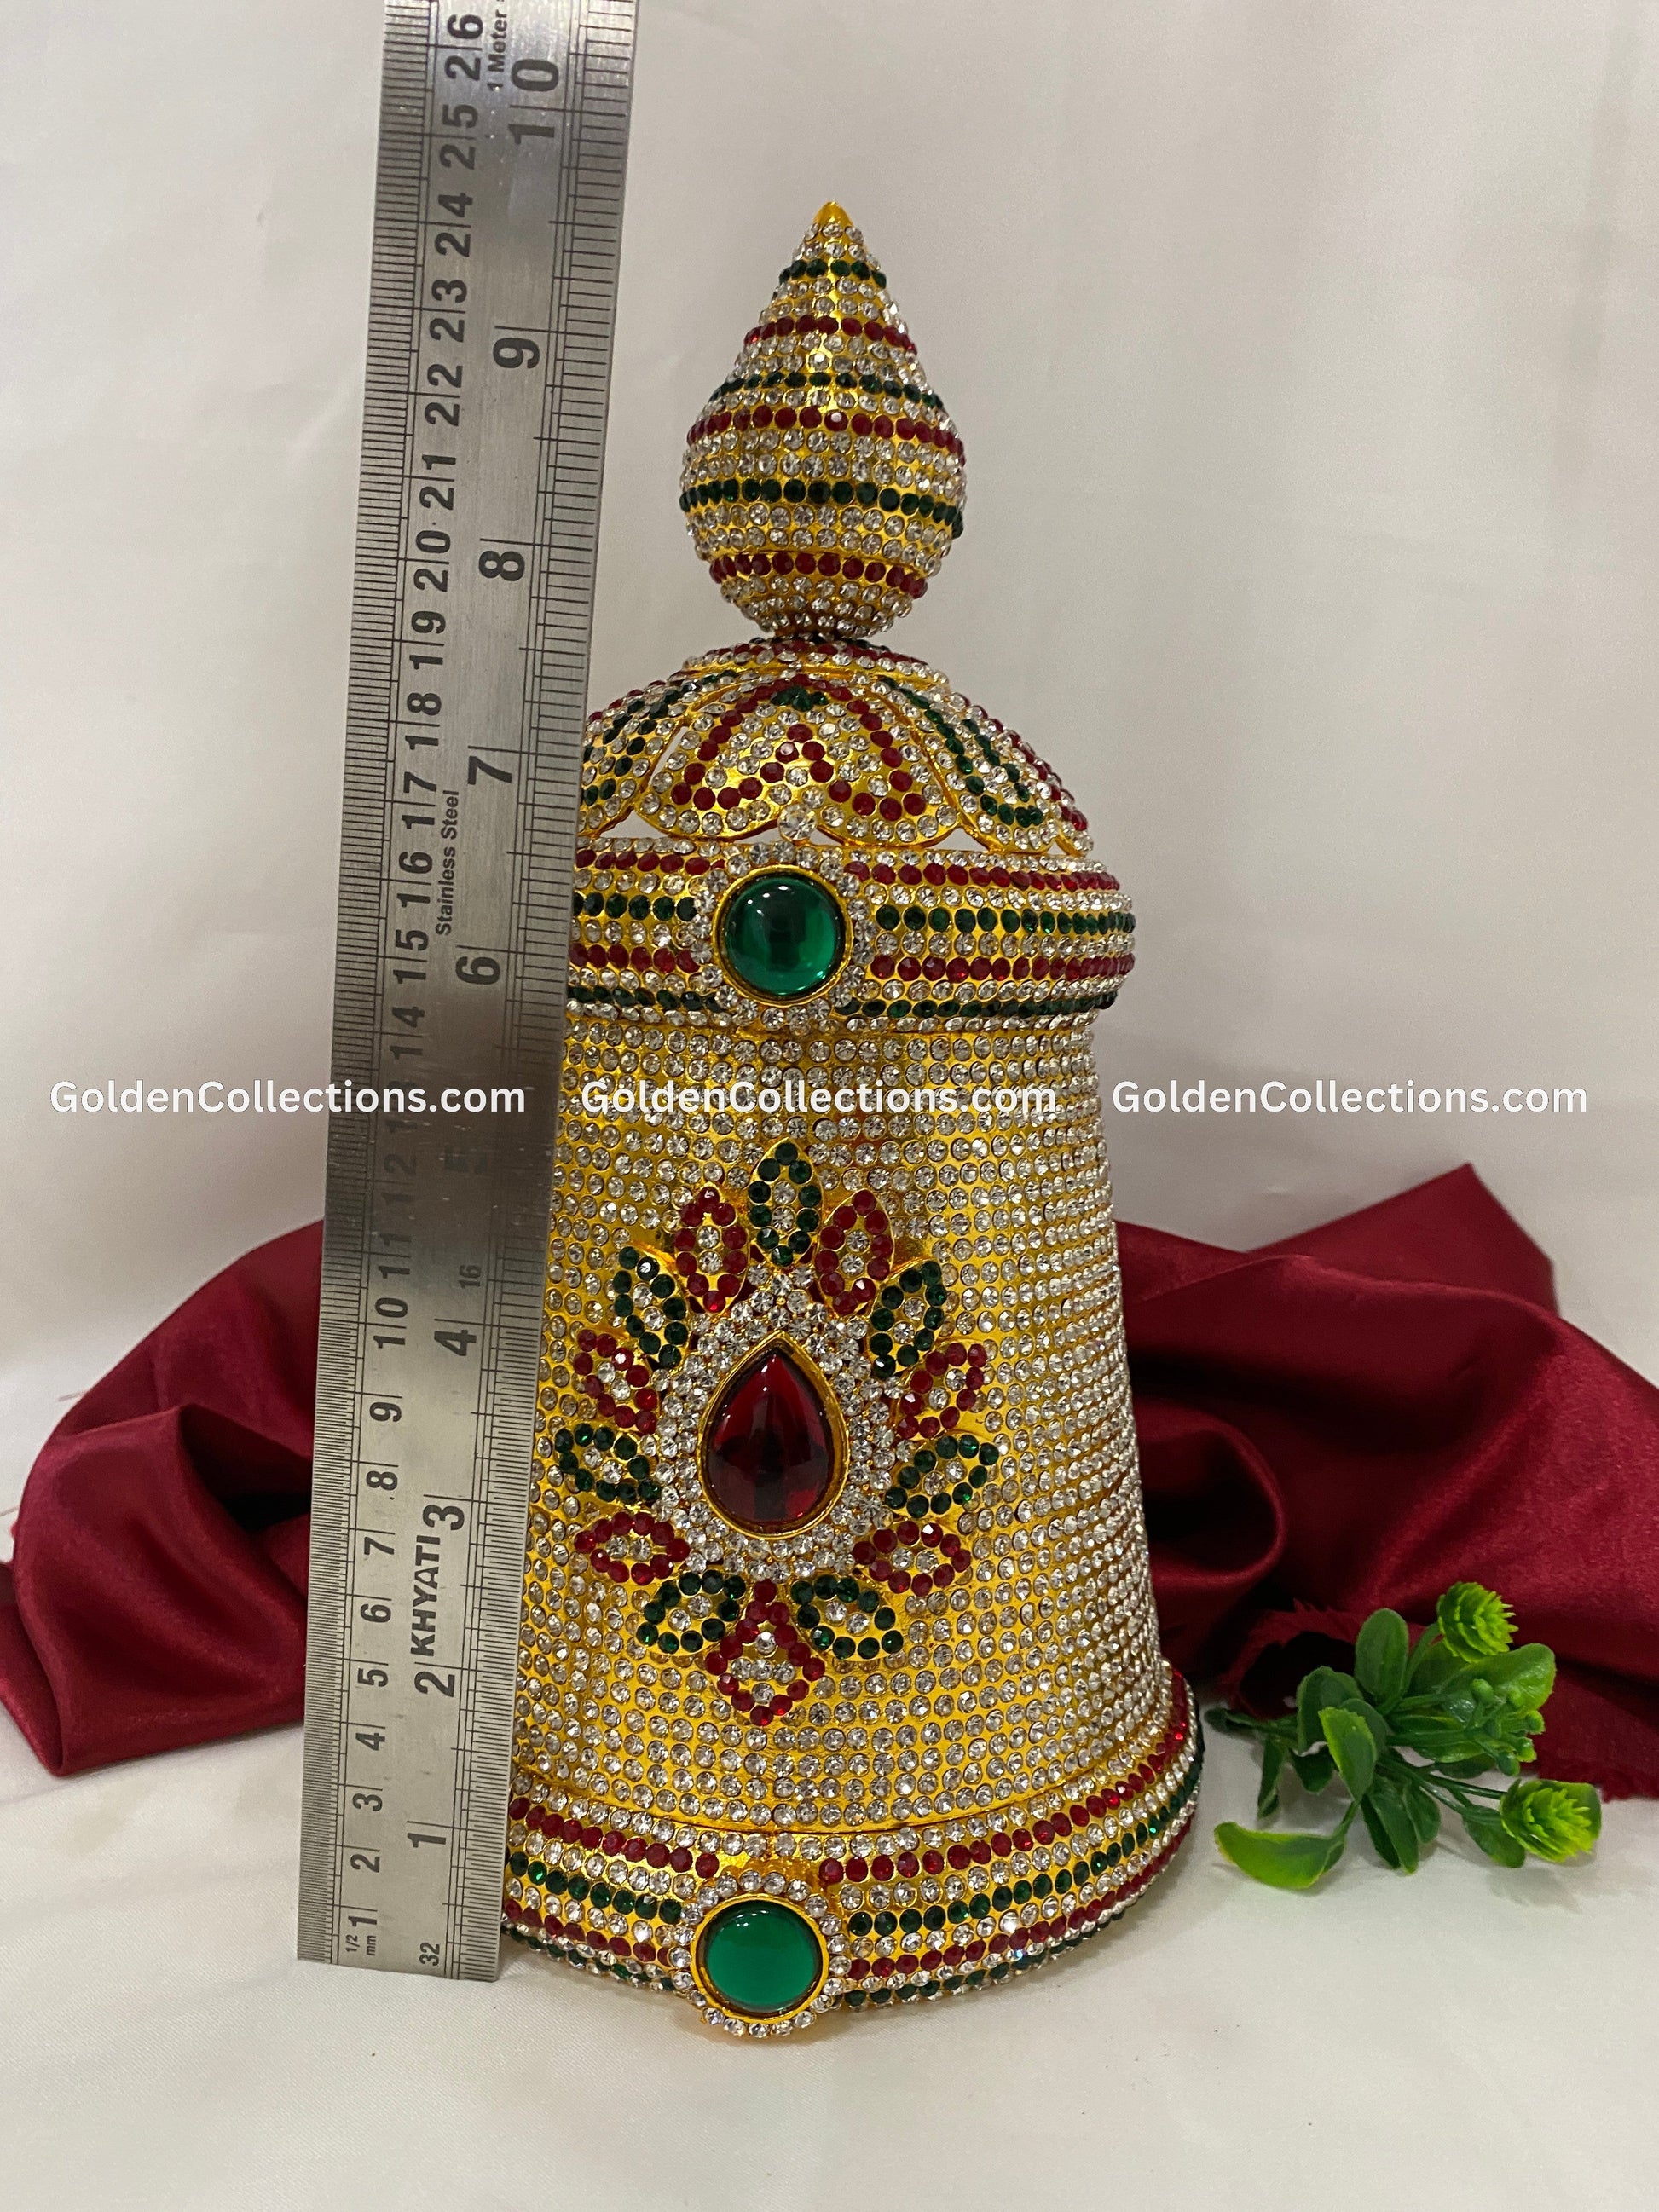 Hindu Deity Crown with Intricate Design - GoldenCollections DGC-035 2